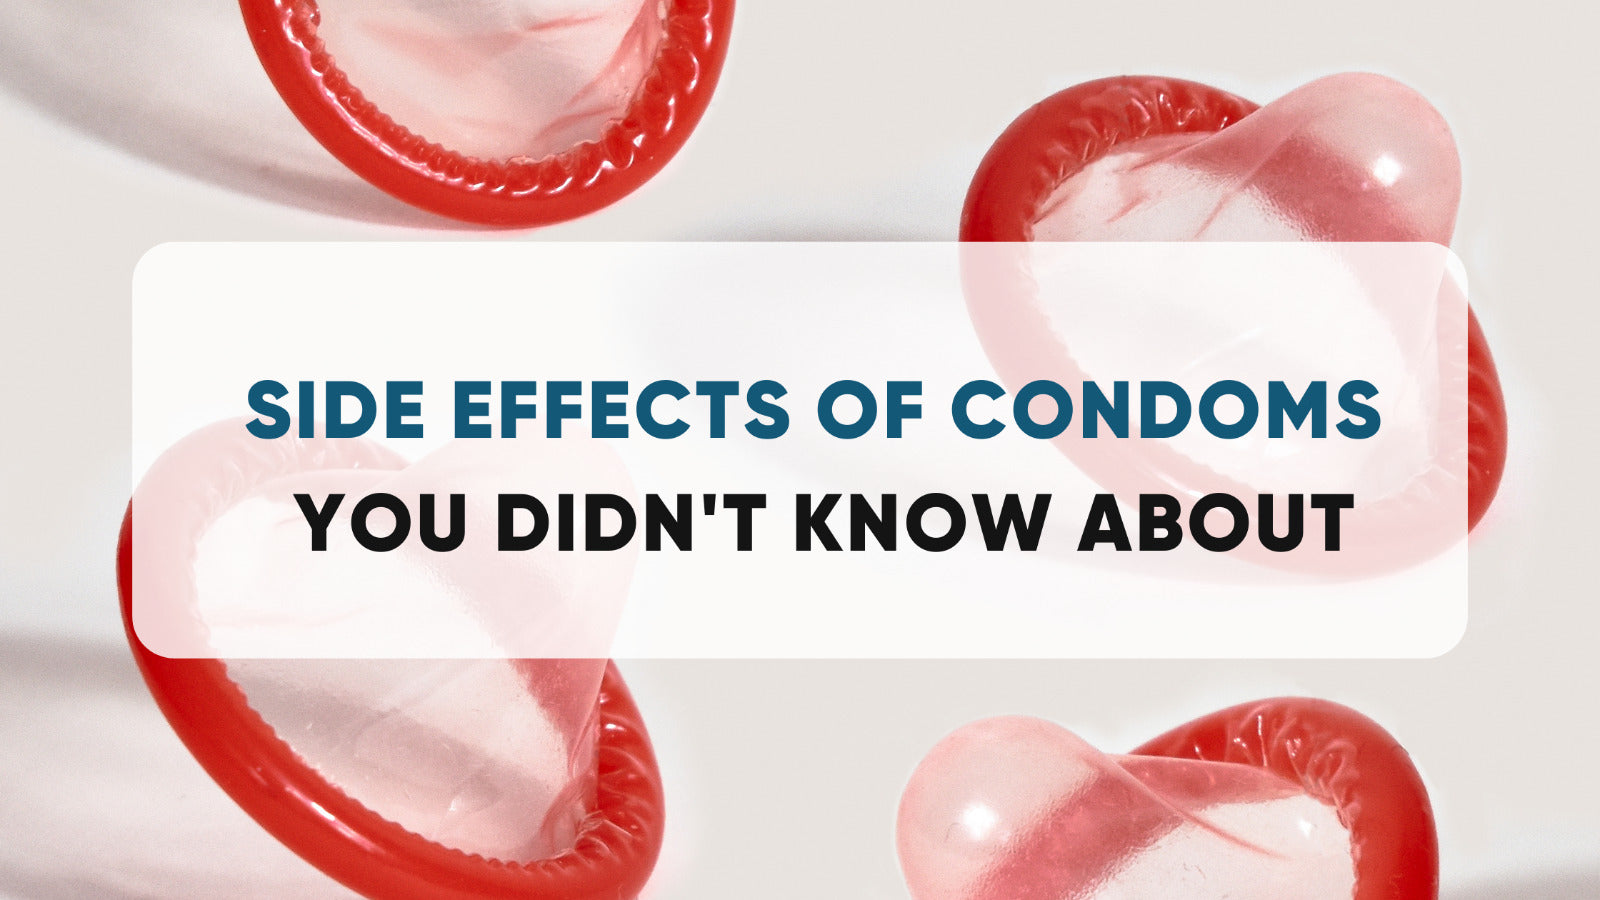 <p><b>SIDE EFFECTS OF CONDOMS YOU DIDN'T KNOW ABOUT</b></p> <p> </p>